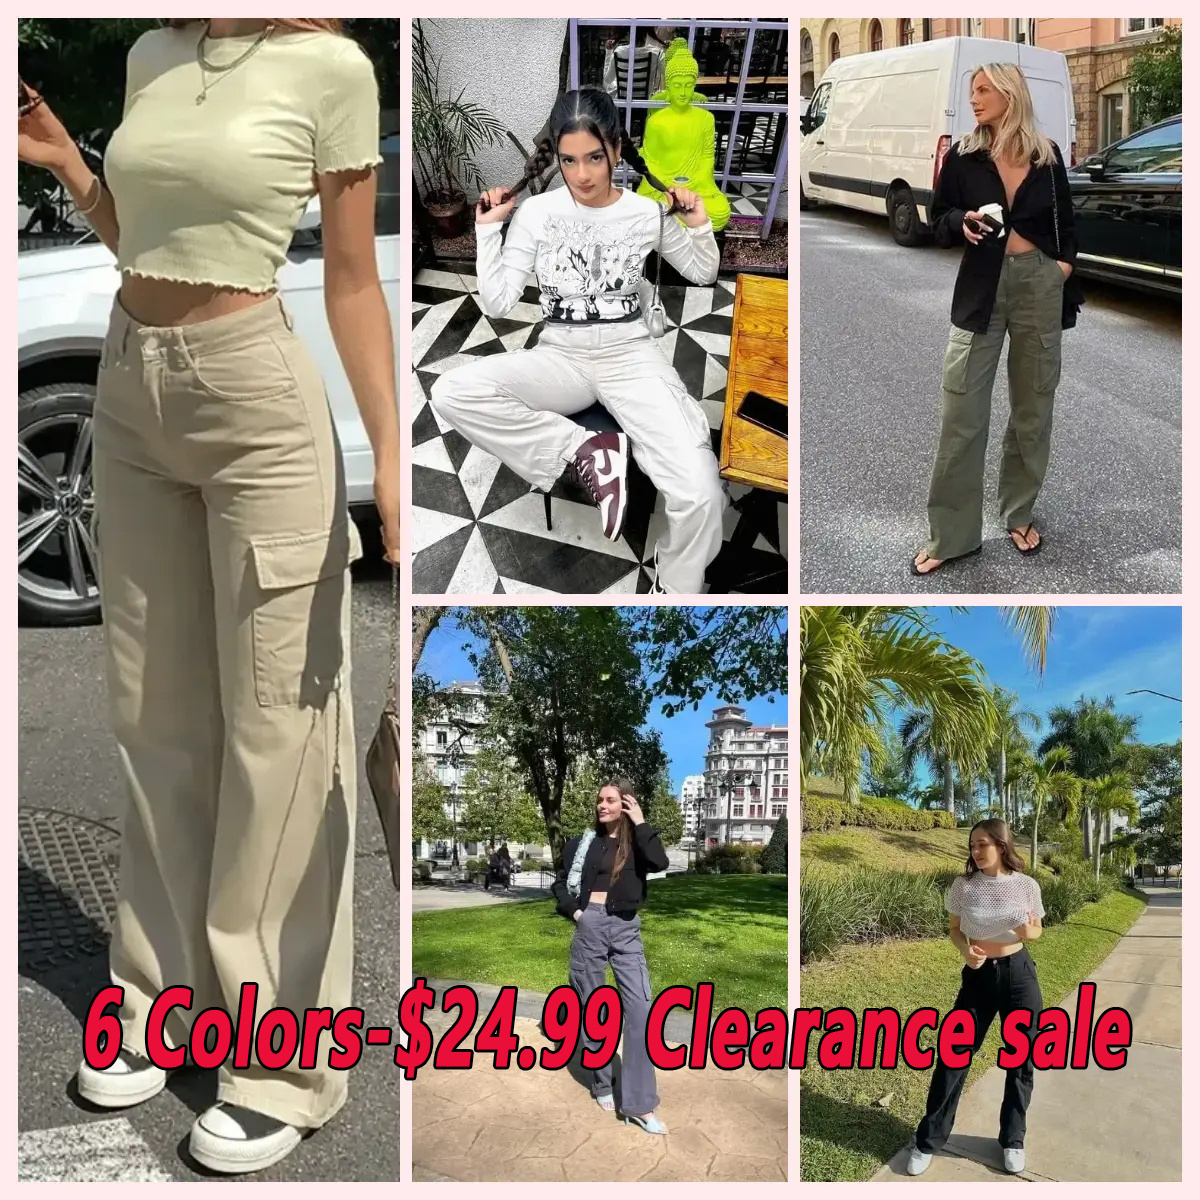 Summer Promotion 60% OFF - Adjustable Straight Fit Cargo Pants